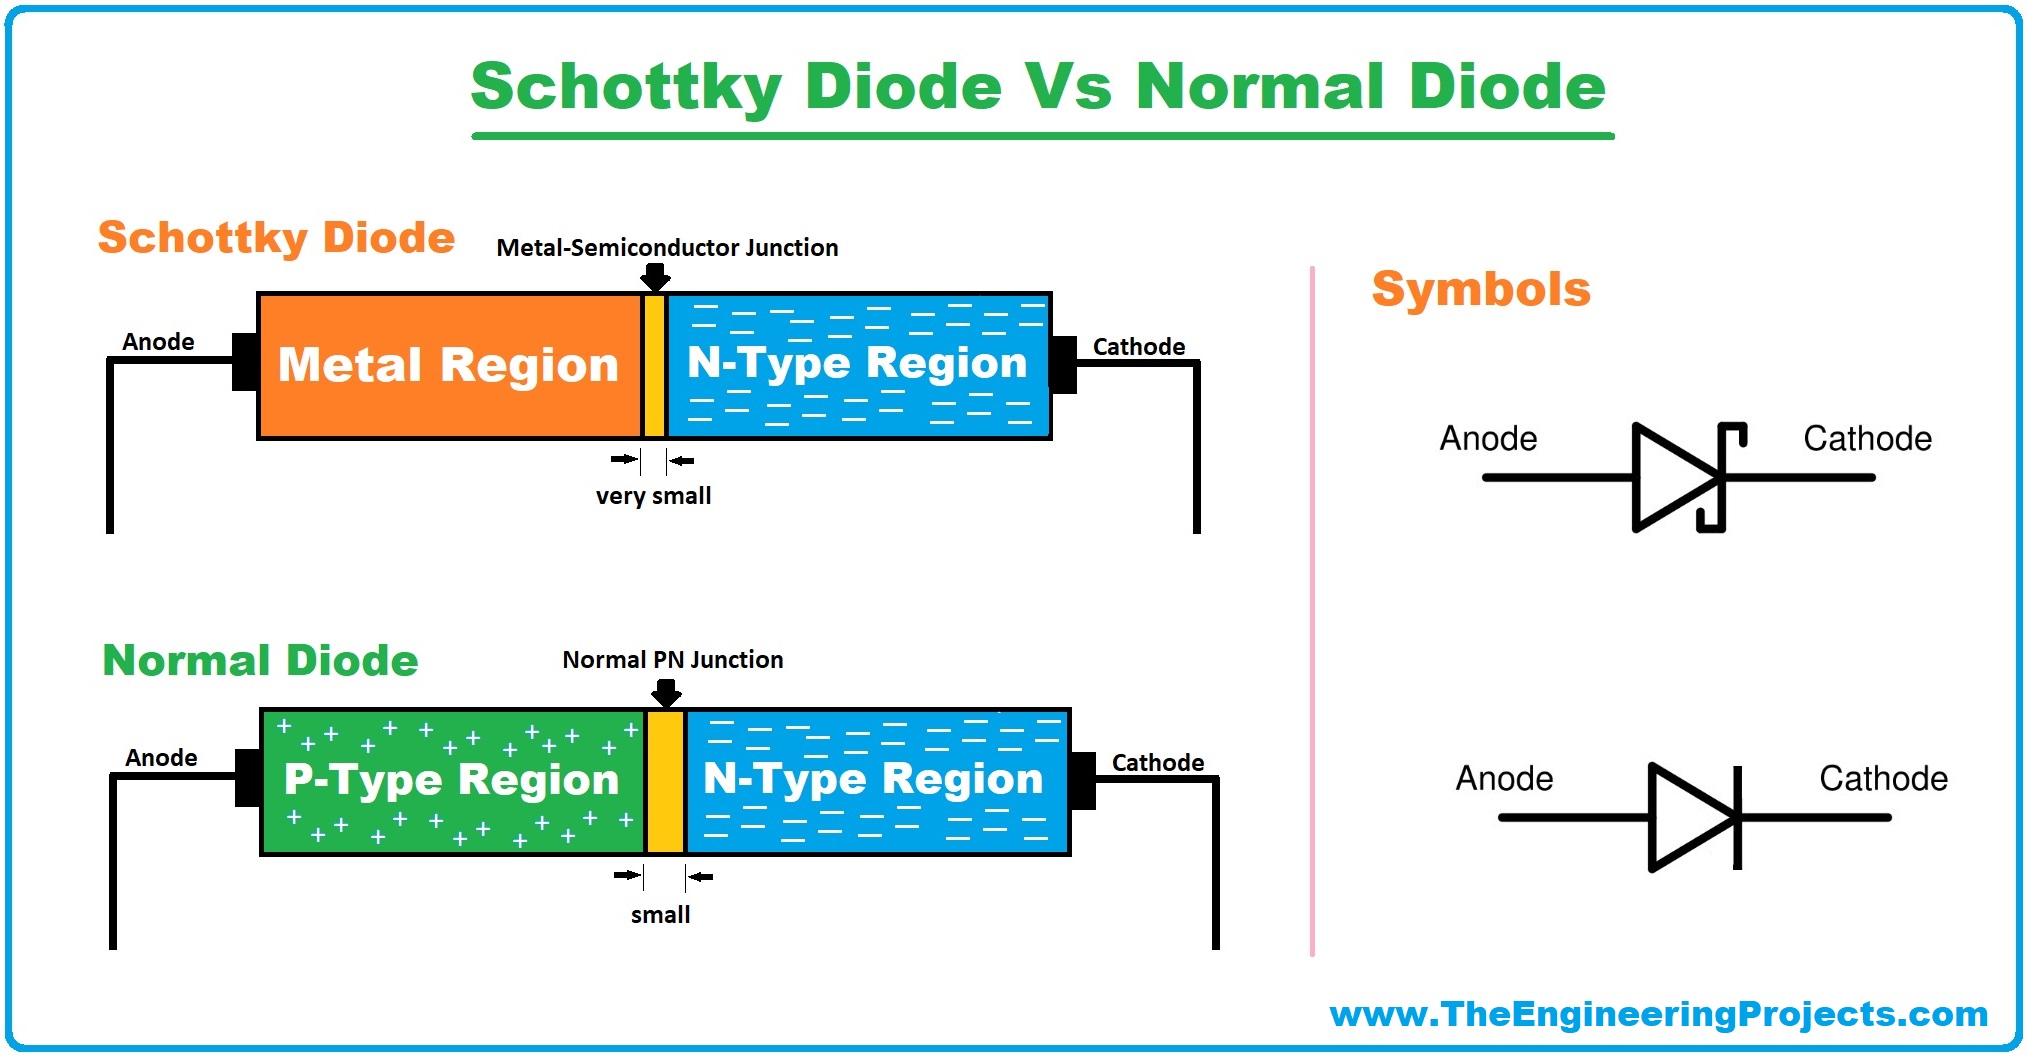 Schottky Diode, Schottky barrier diode, Schottky barrier, Schottky Diode working, Schottky Diode application, Schottky Diode characteristics, Schottky Diode vs normal diode